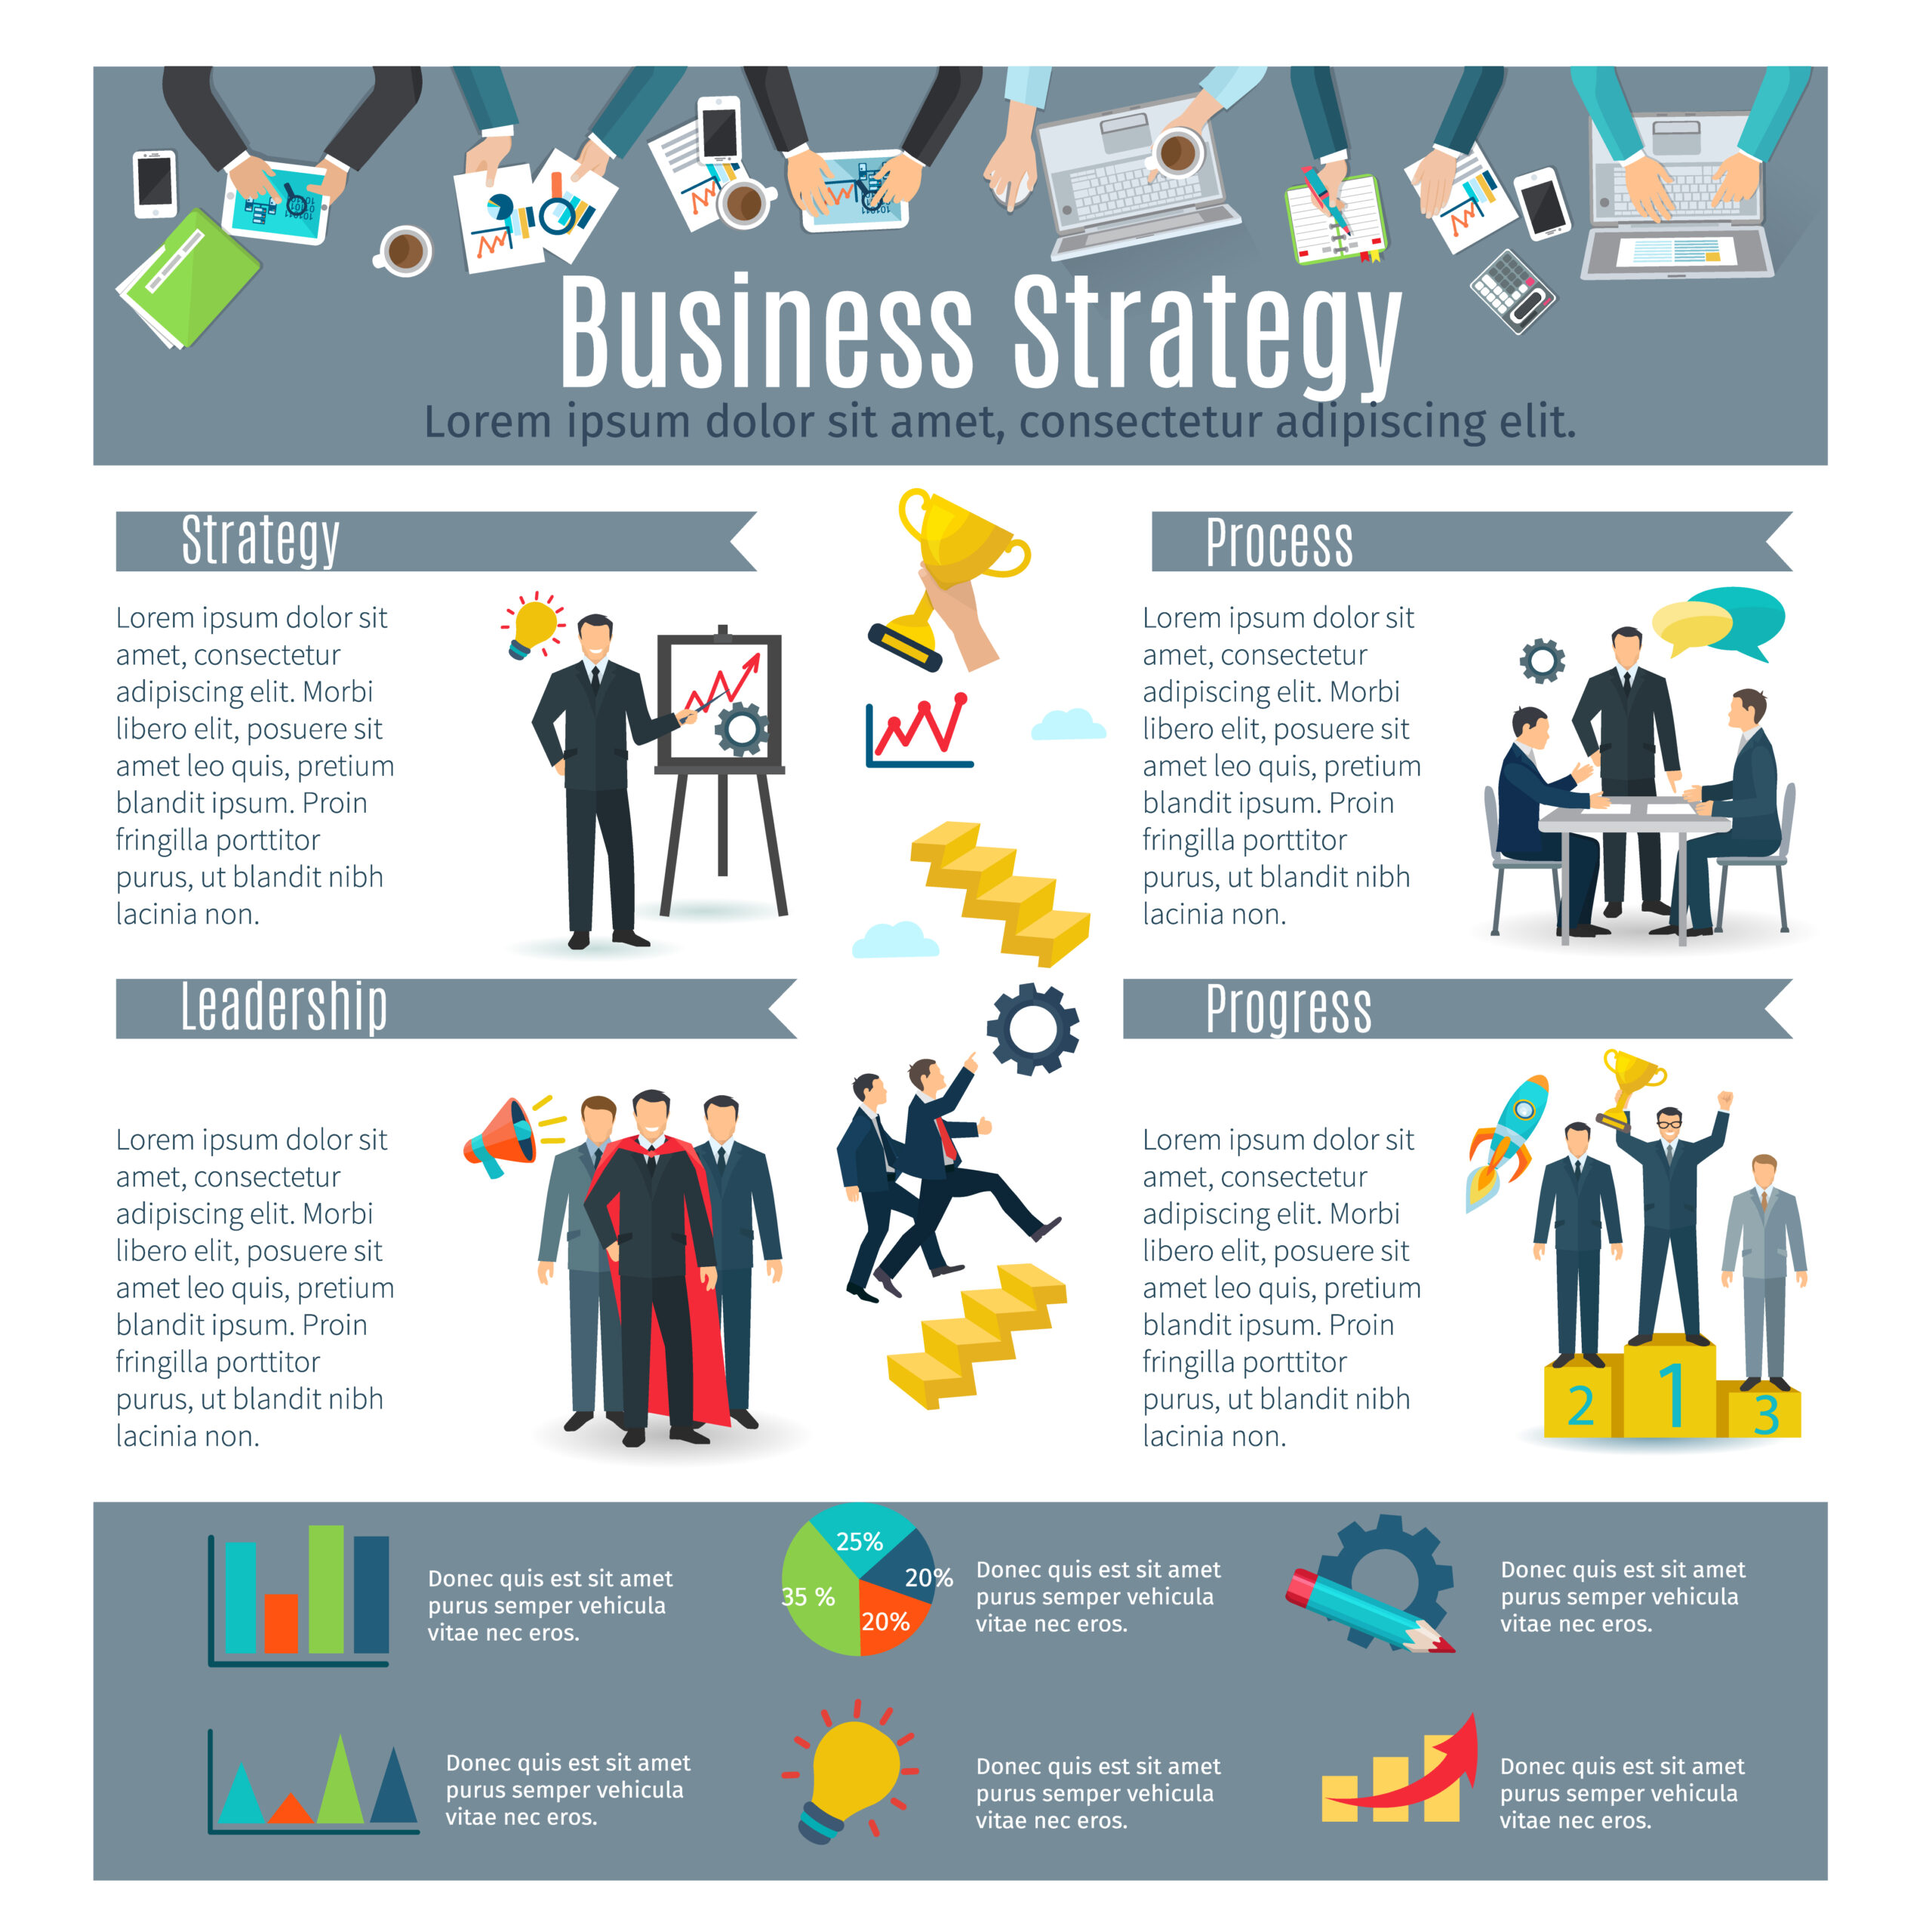 40+ Business Infographic Templates and Ideas to Try in 2021